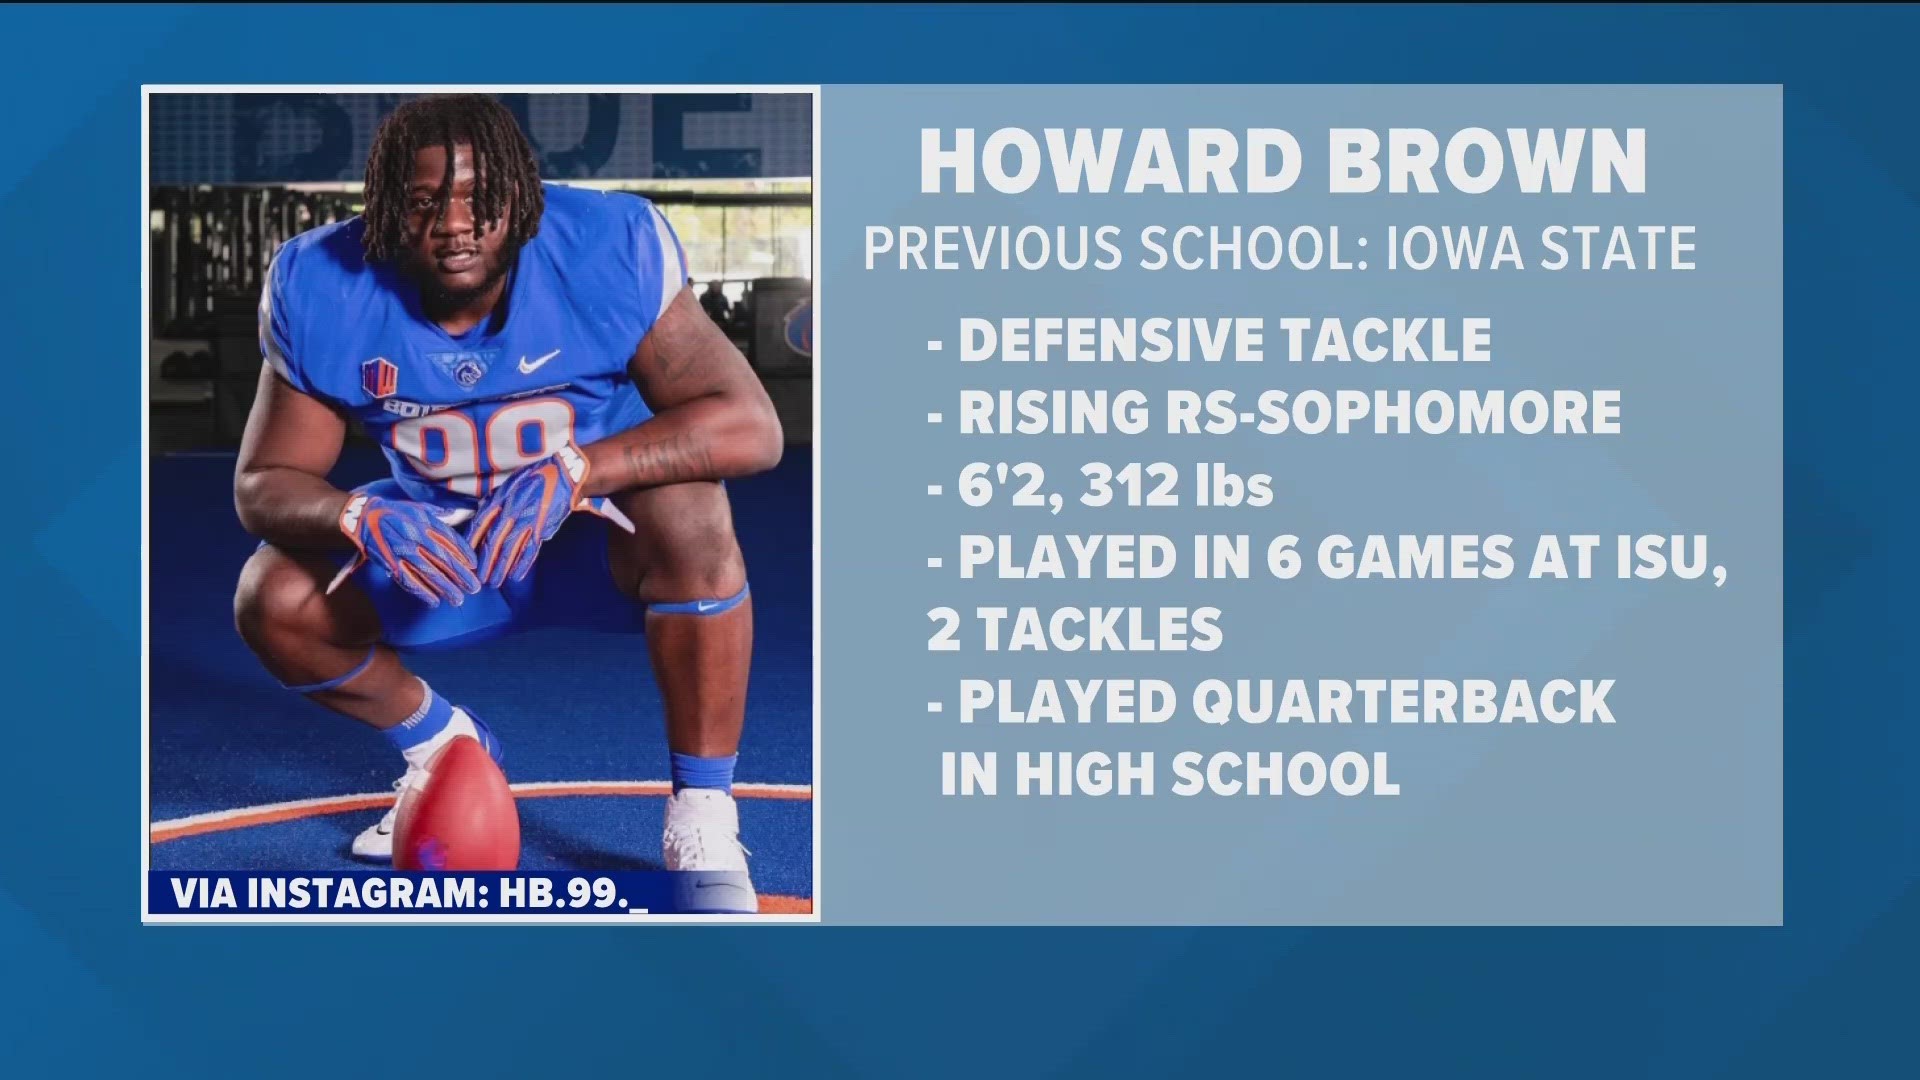 Former Iowa State DT Howard Brown announced on Instagram he is committed to the blue and orange. The 6-foot-2, 312-pound player recorded two tackles as a Cyclone.